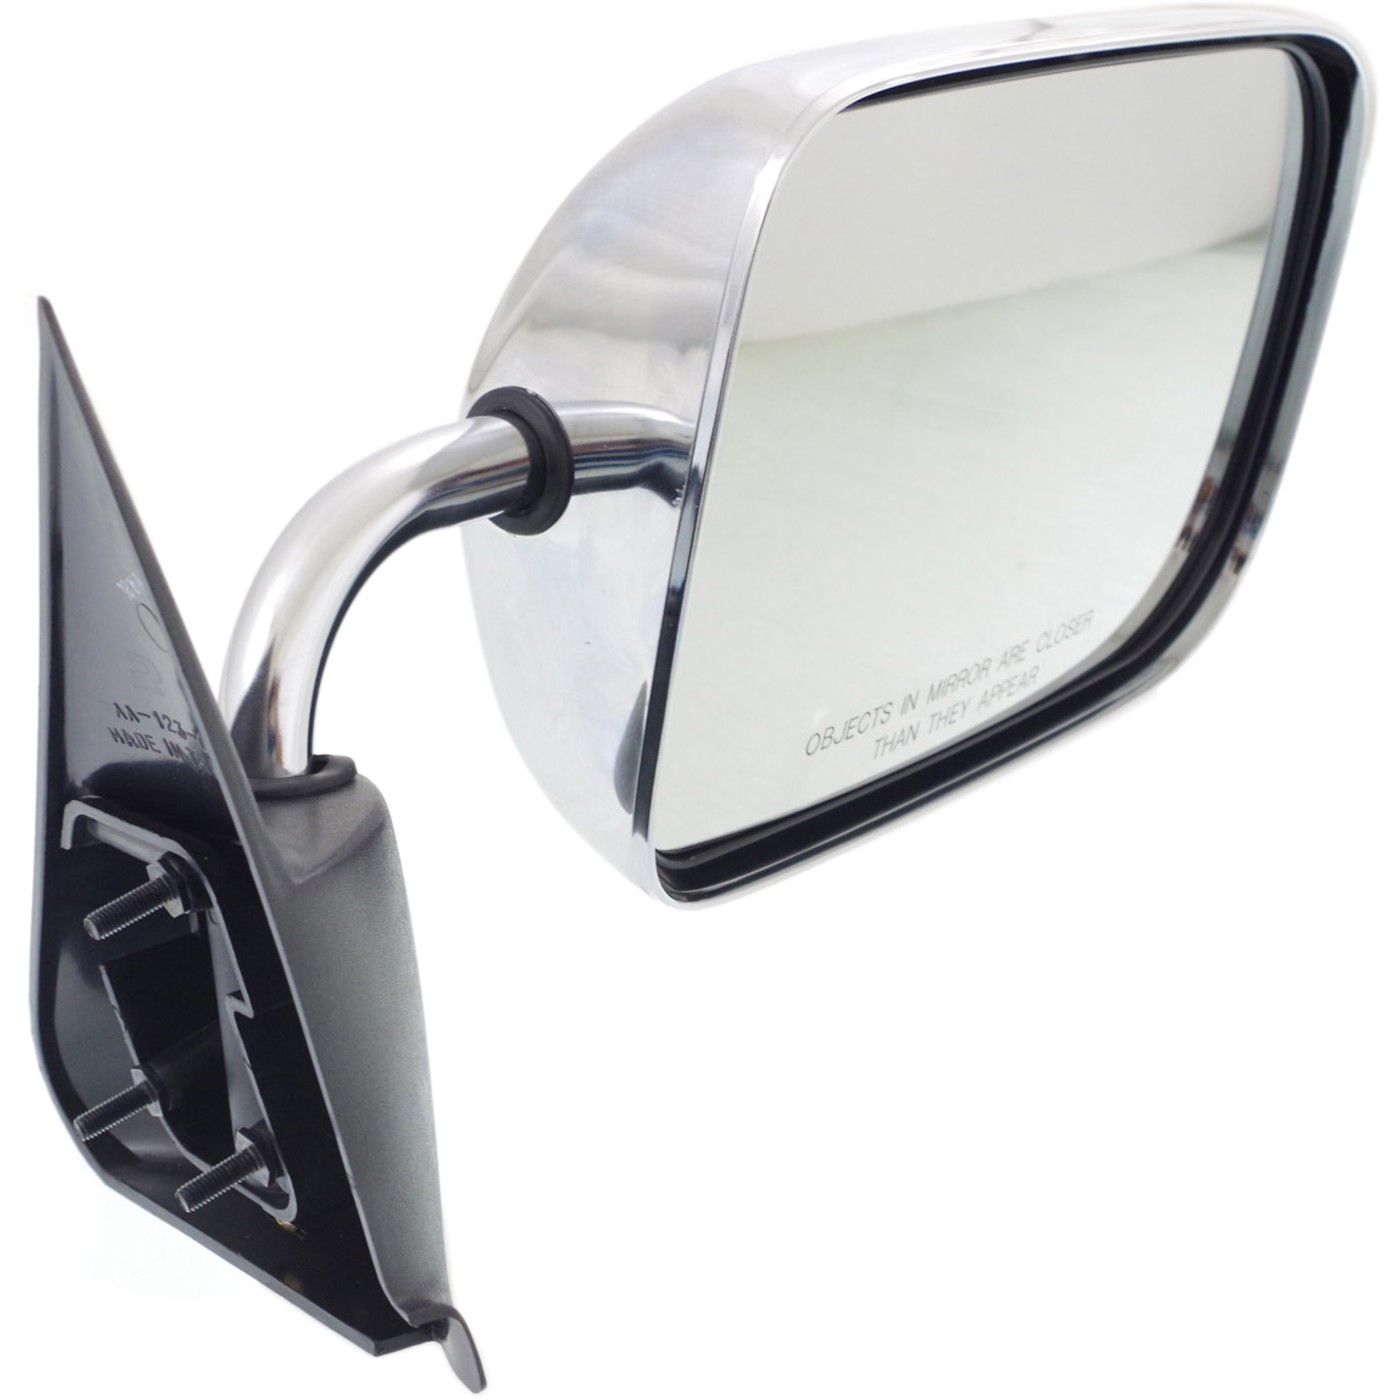 2001 Dodge Ram 1500 Side Mirror Replacement